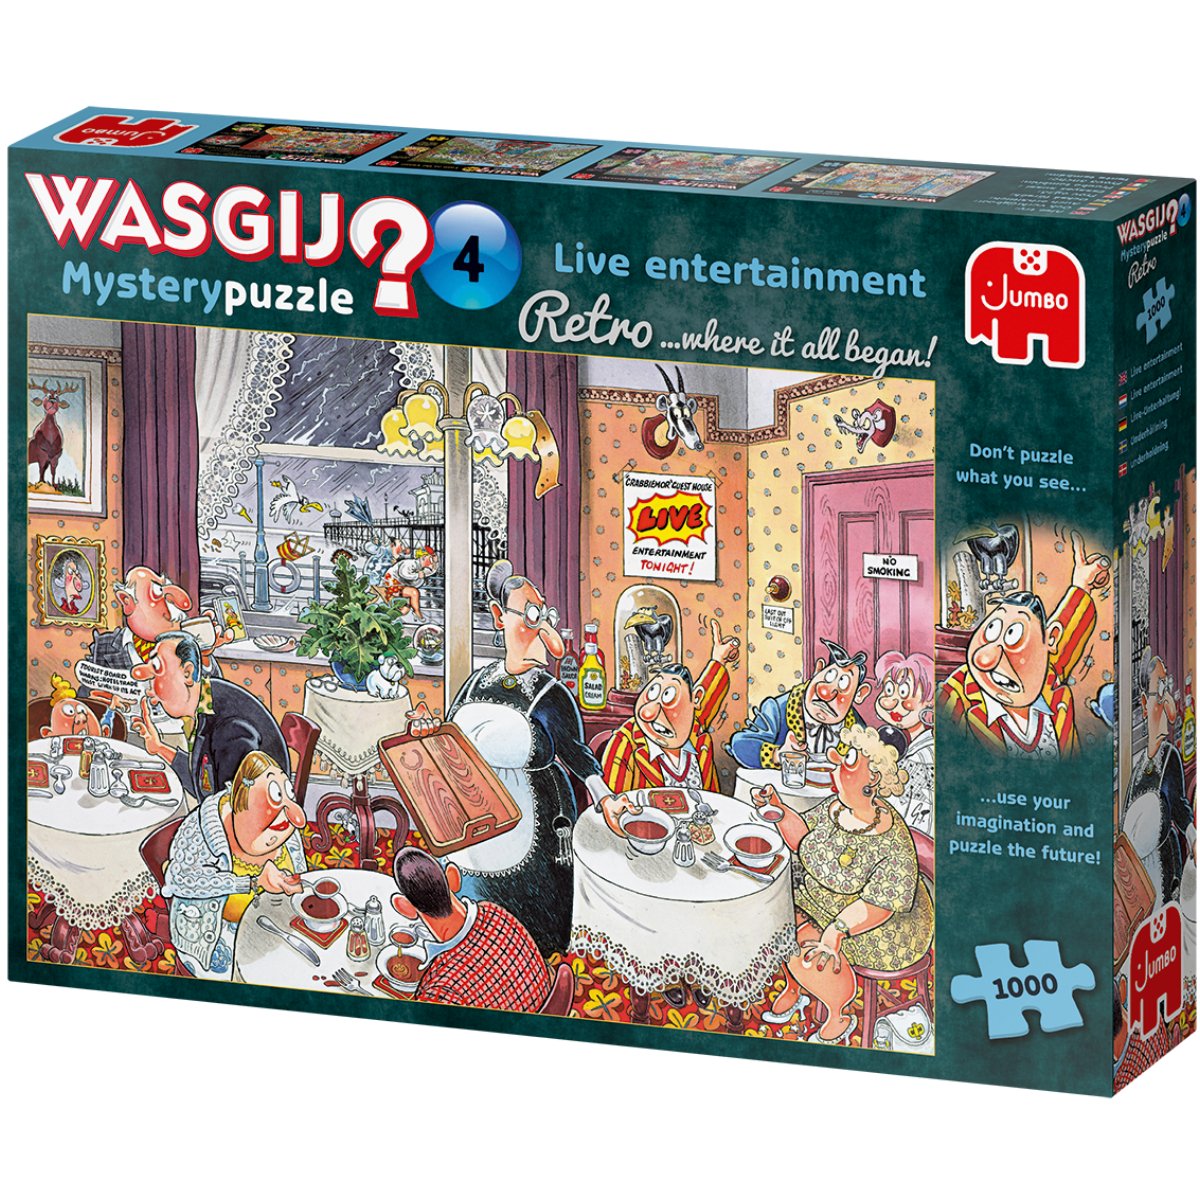 Wasgij Retro Mystery 4 Live Entertainment Jigsaw Puzzle (1000 Pieces) - Phillips Hobbies